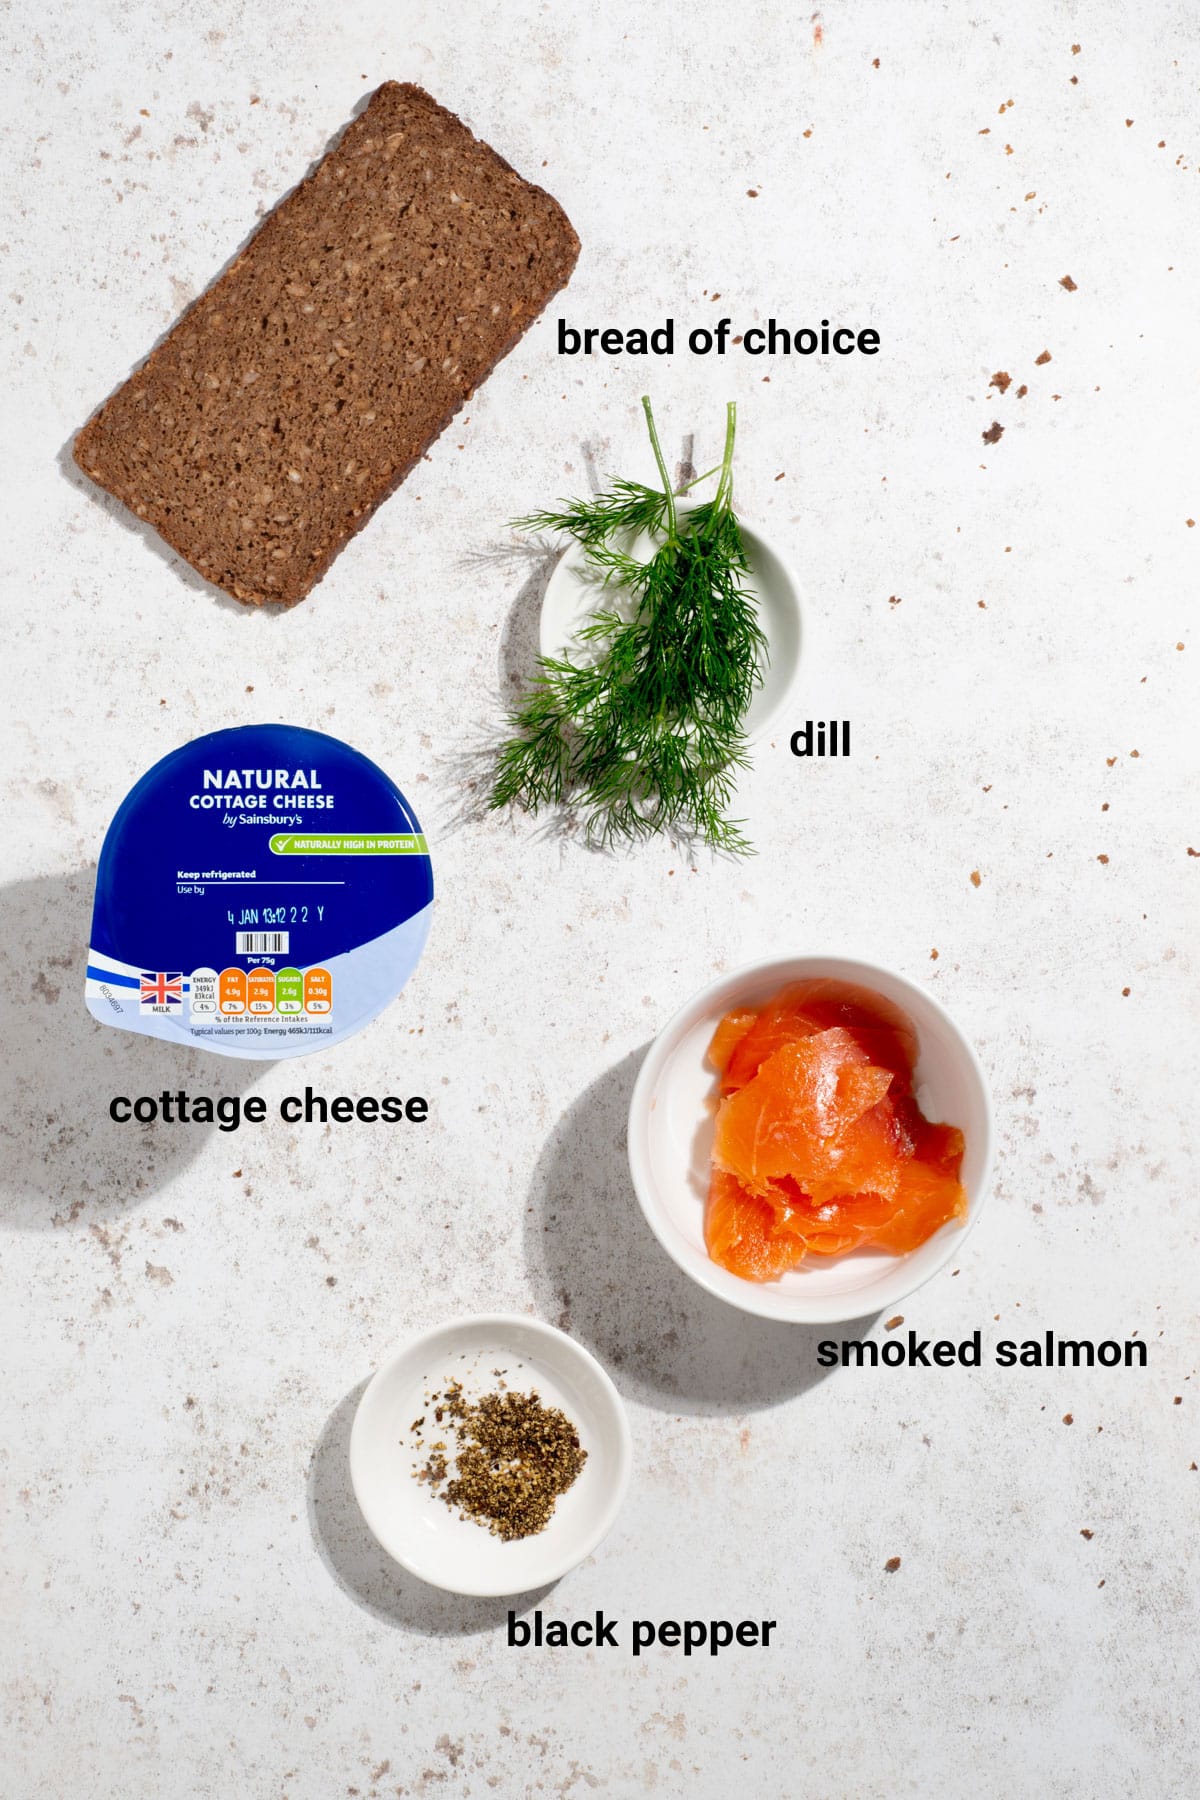 Salmon and dill toast ingredients.